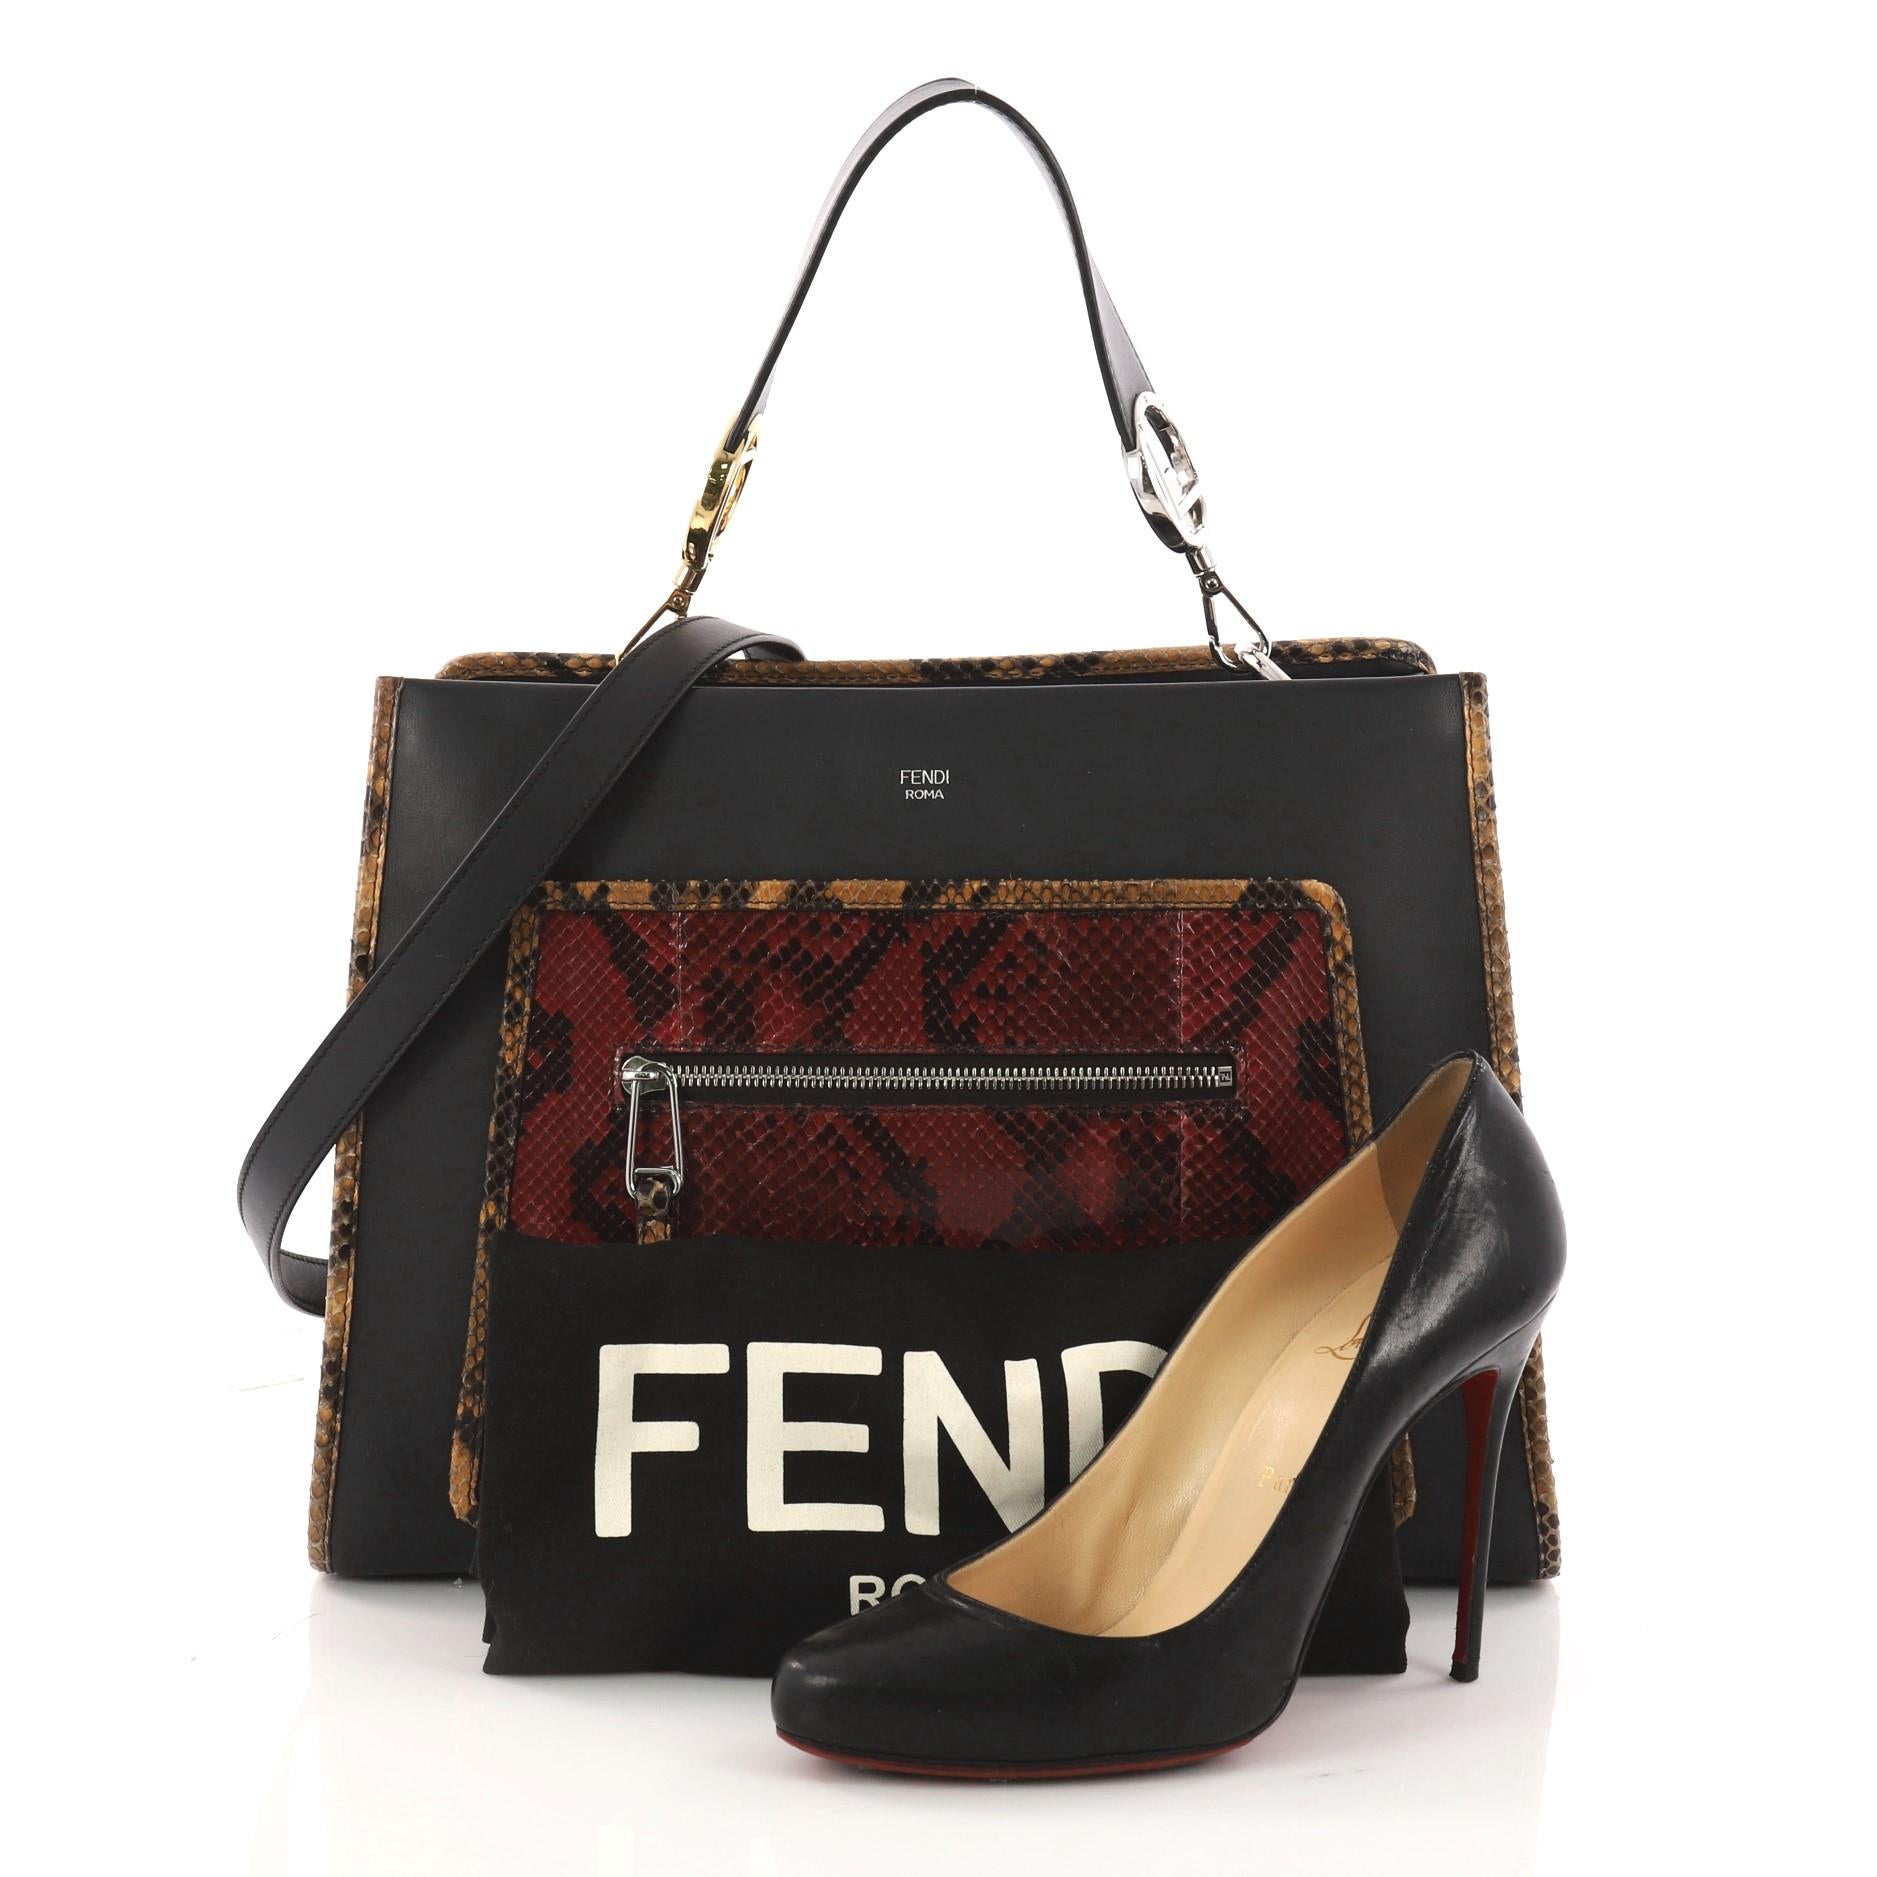 This authentic Fendi Runaway Handbag Leather and Python Medium is chic and stylish bag with a rigid structure. Crafted in black leather and genuine red python skin, this handbag features a removable flat top handle embellished with the new Fendi